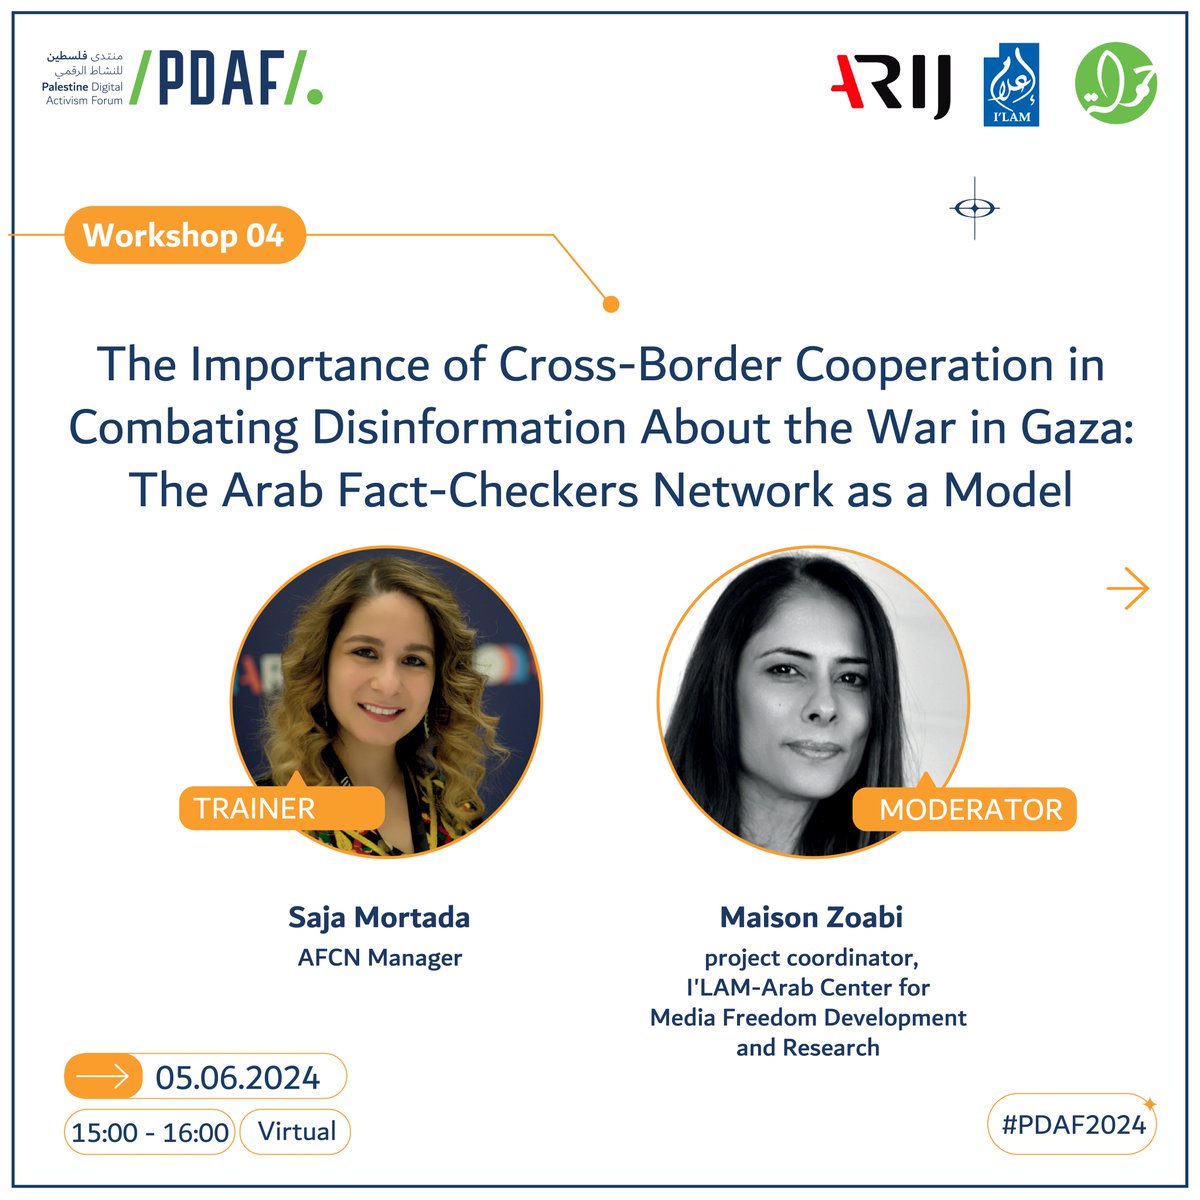 💻On the second day of PDAF 2024, join us for “The Importance of Cross-Border Cooperation in Combating Disinformation About the War in Gaza: The Arab Fact-Checkers Network as a Model” 📌Reserve your seat: cutt.ly/KetgRXdS #PDAF2024 @ARIJNetwork @Zoabi1Zoabi @MortadaSaja